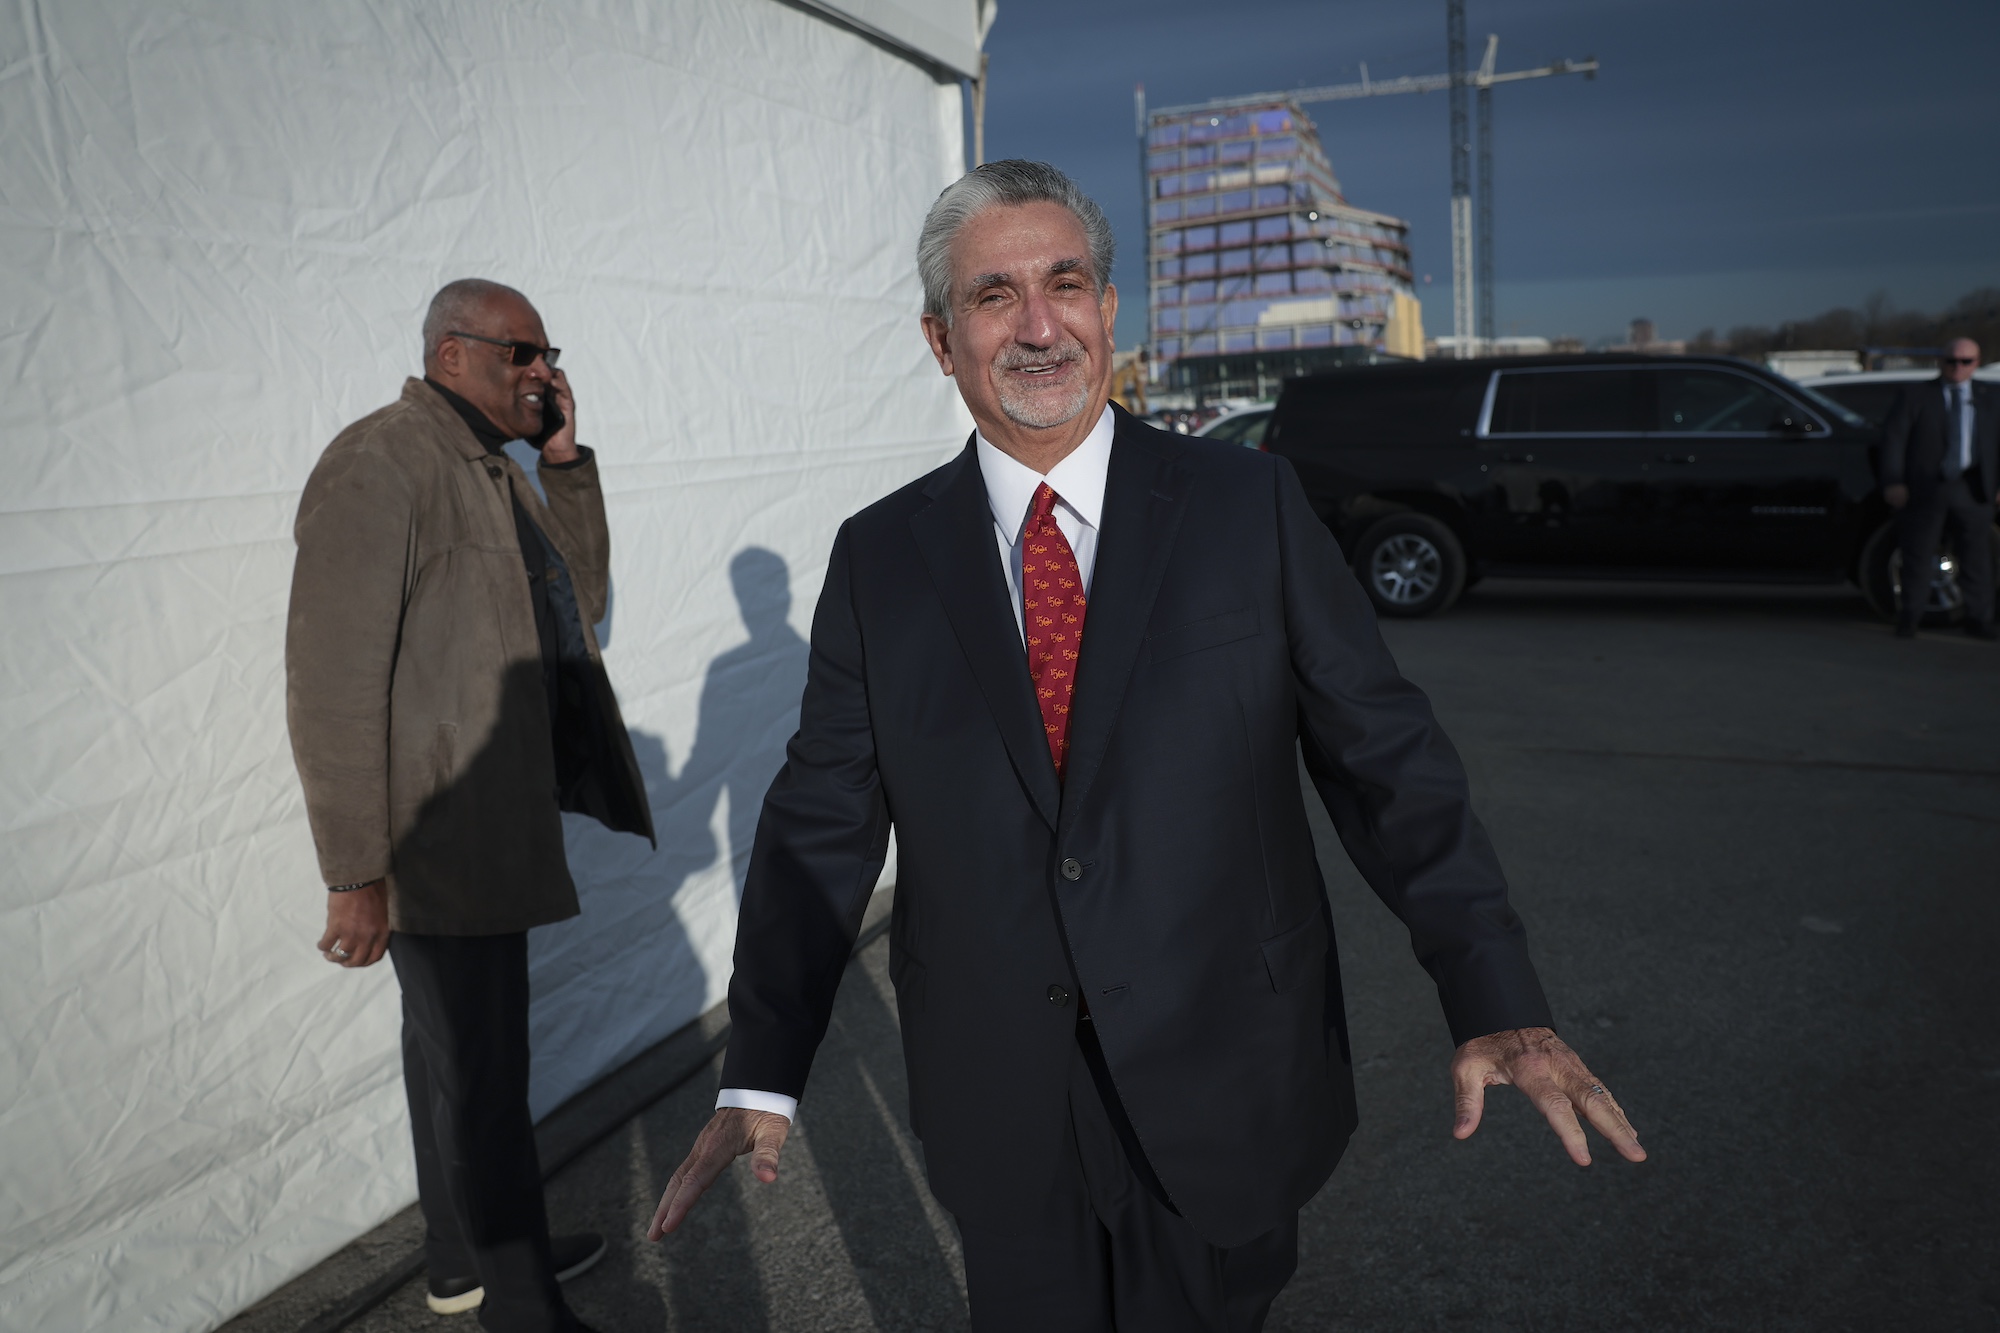 ALEXANDRIA, VIRGINIA - DECEMBER 13: Monumental Sports &amp; Entertainment CEO Ted Leonsis (R) arrives for the announcement of a new sports arena for the Washington Wizards NBA basketball team and Washington Capitals NHL hockey team, December 13, 2023 in Alexandria, Virginia. Virginia Gov. Glenn Youngkin announced a tentative agreement with Monumental Sports &amp; Entertainment that would move the Wizards and the Capitals from Washington, DC to what Youngkin called a new "visionary sports and entertainment venue" in northern Virginia. (Photo by Win McNamee/Getty Images)